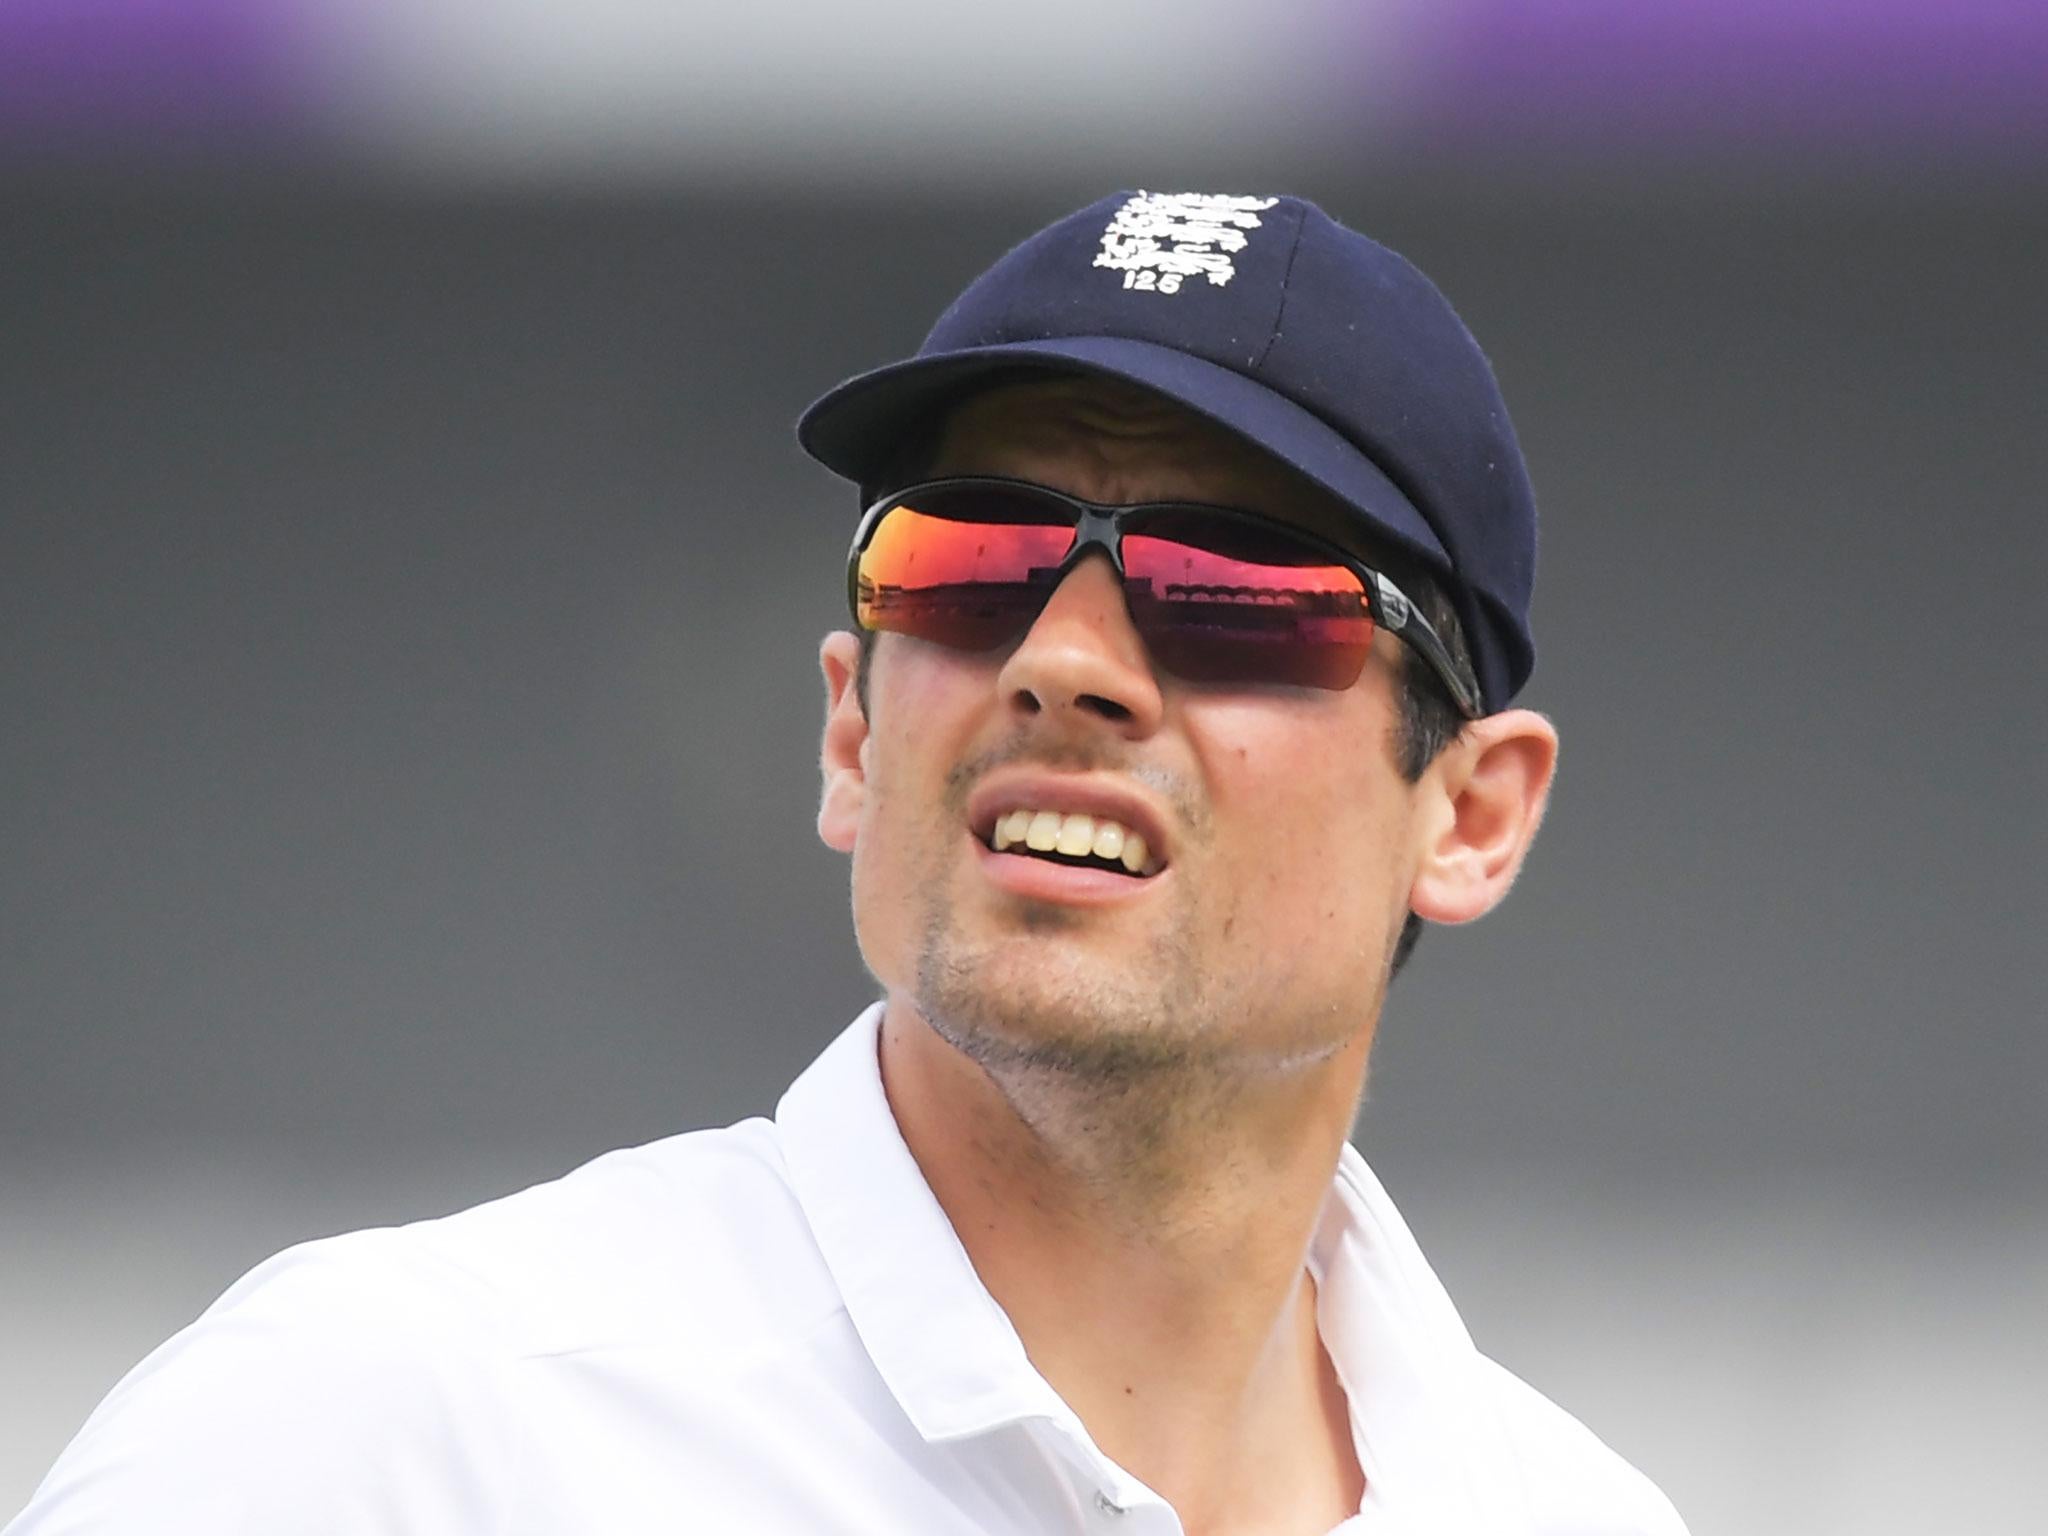 Alastair Cook faced scrutiny for his decisions on the tour of India but he wasn't completely to blame